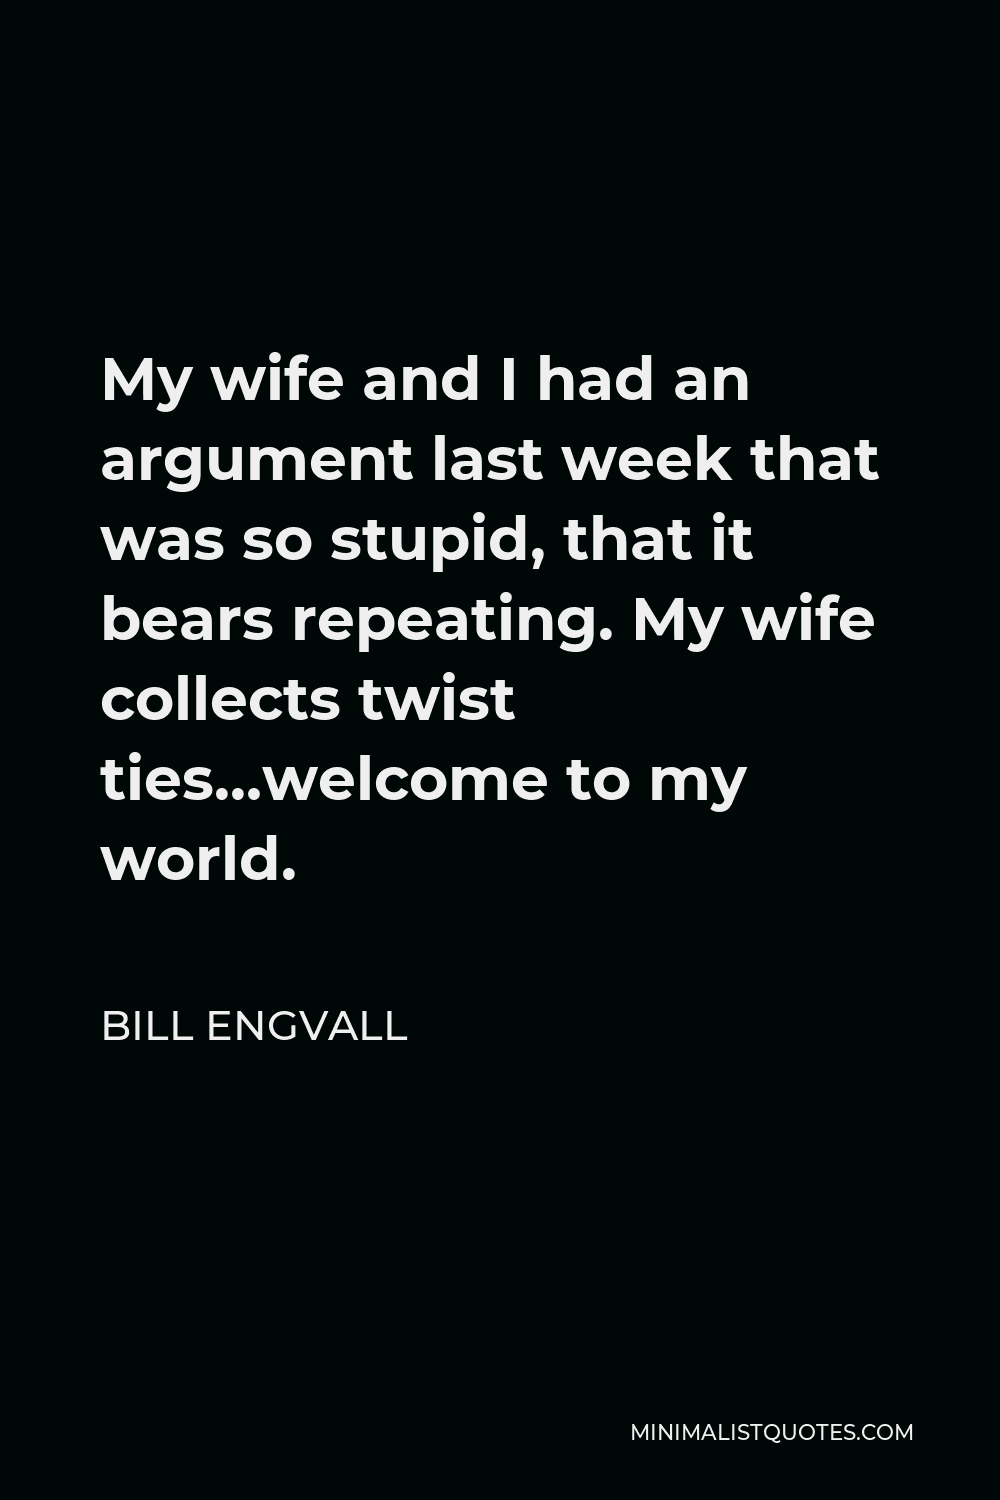 Bill Engvall Quote - My wife and I had an argument last week that was so stupid, that it bears repeating. My wife collects twist ties…welcome to my world.